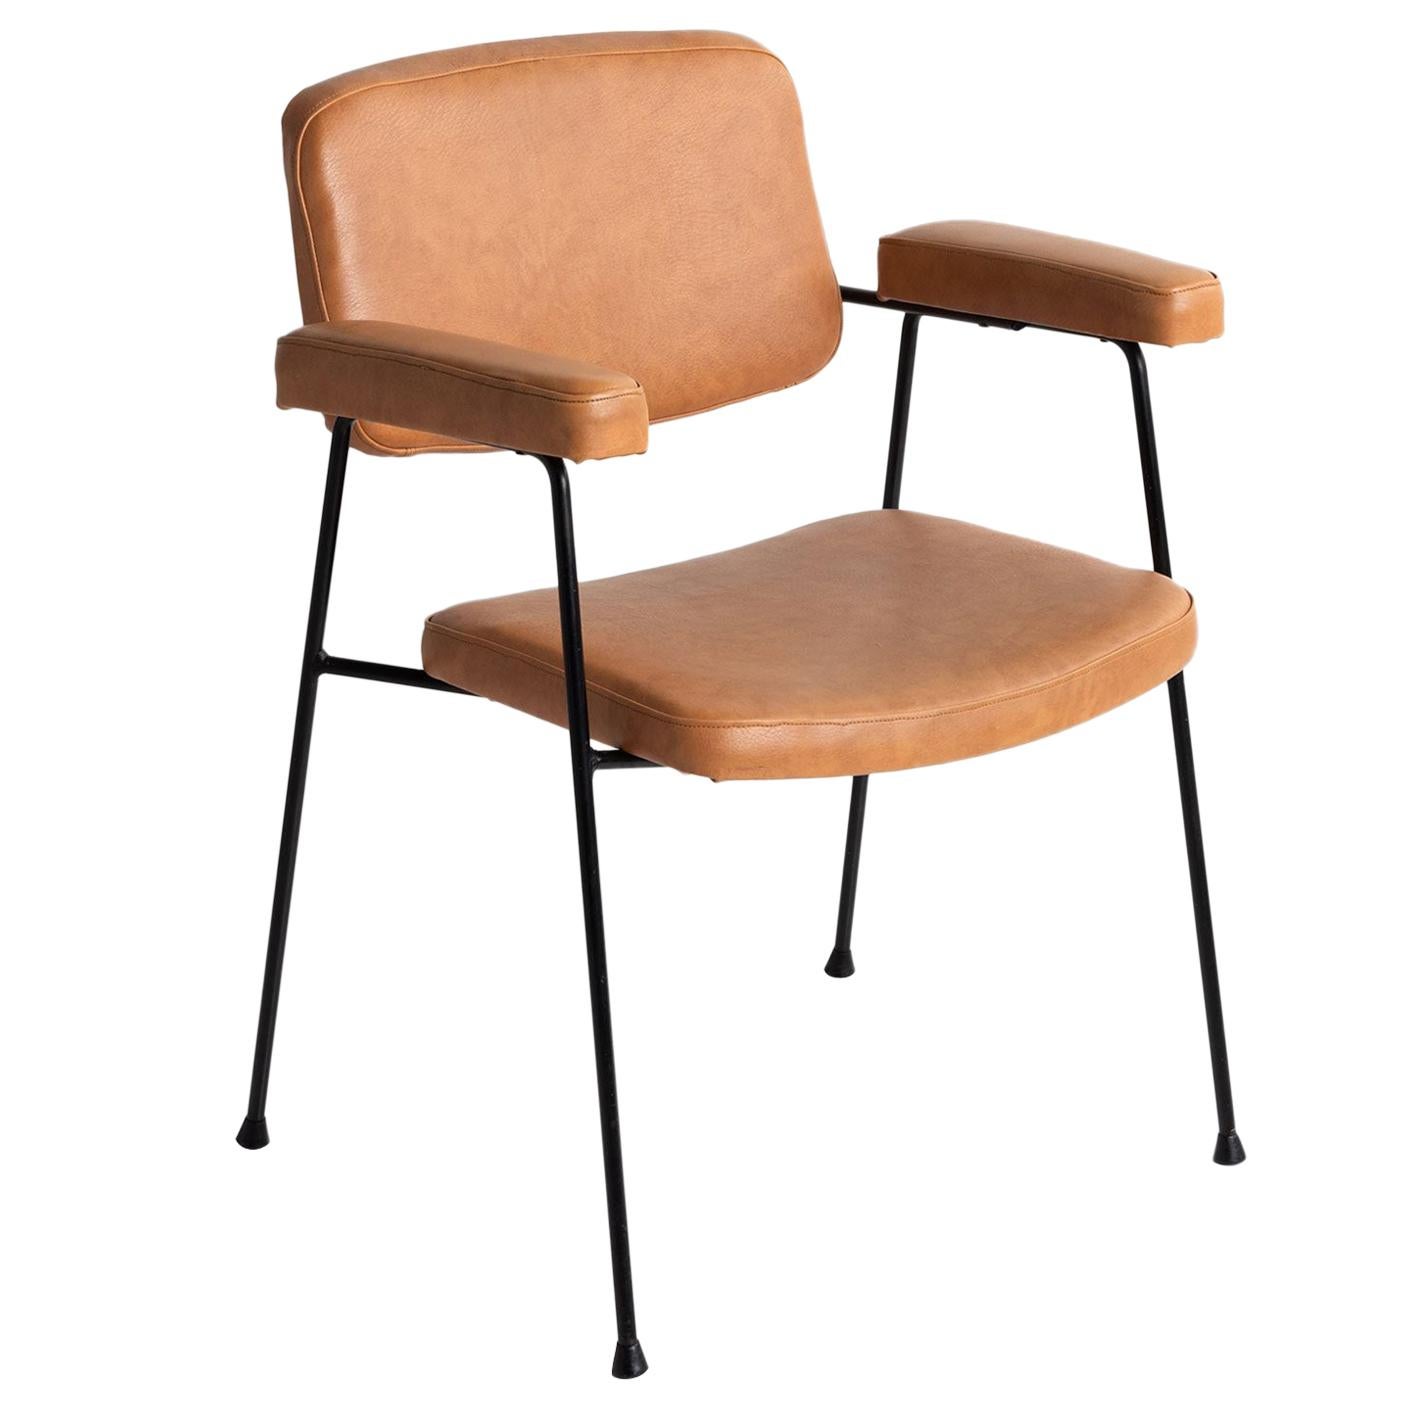 CM197 Chair by Pierre Paulin for Thonet